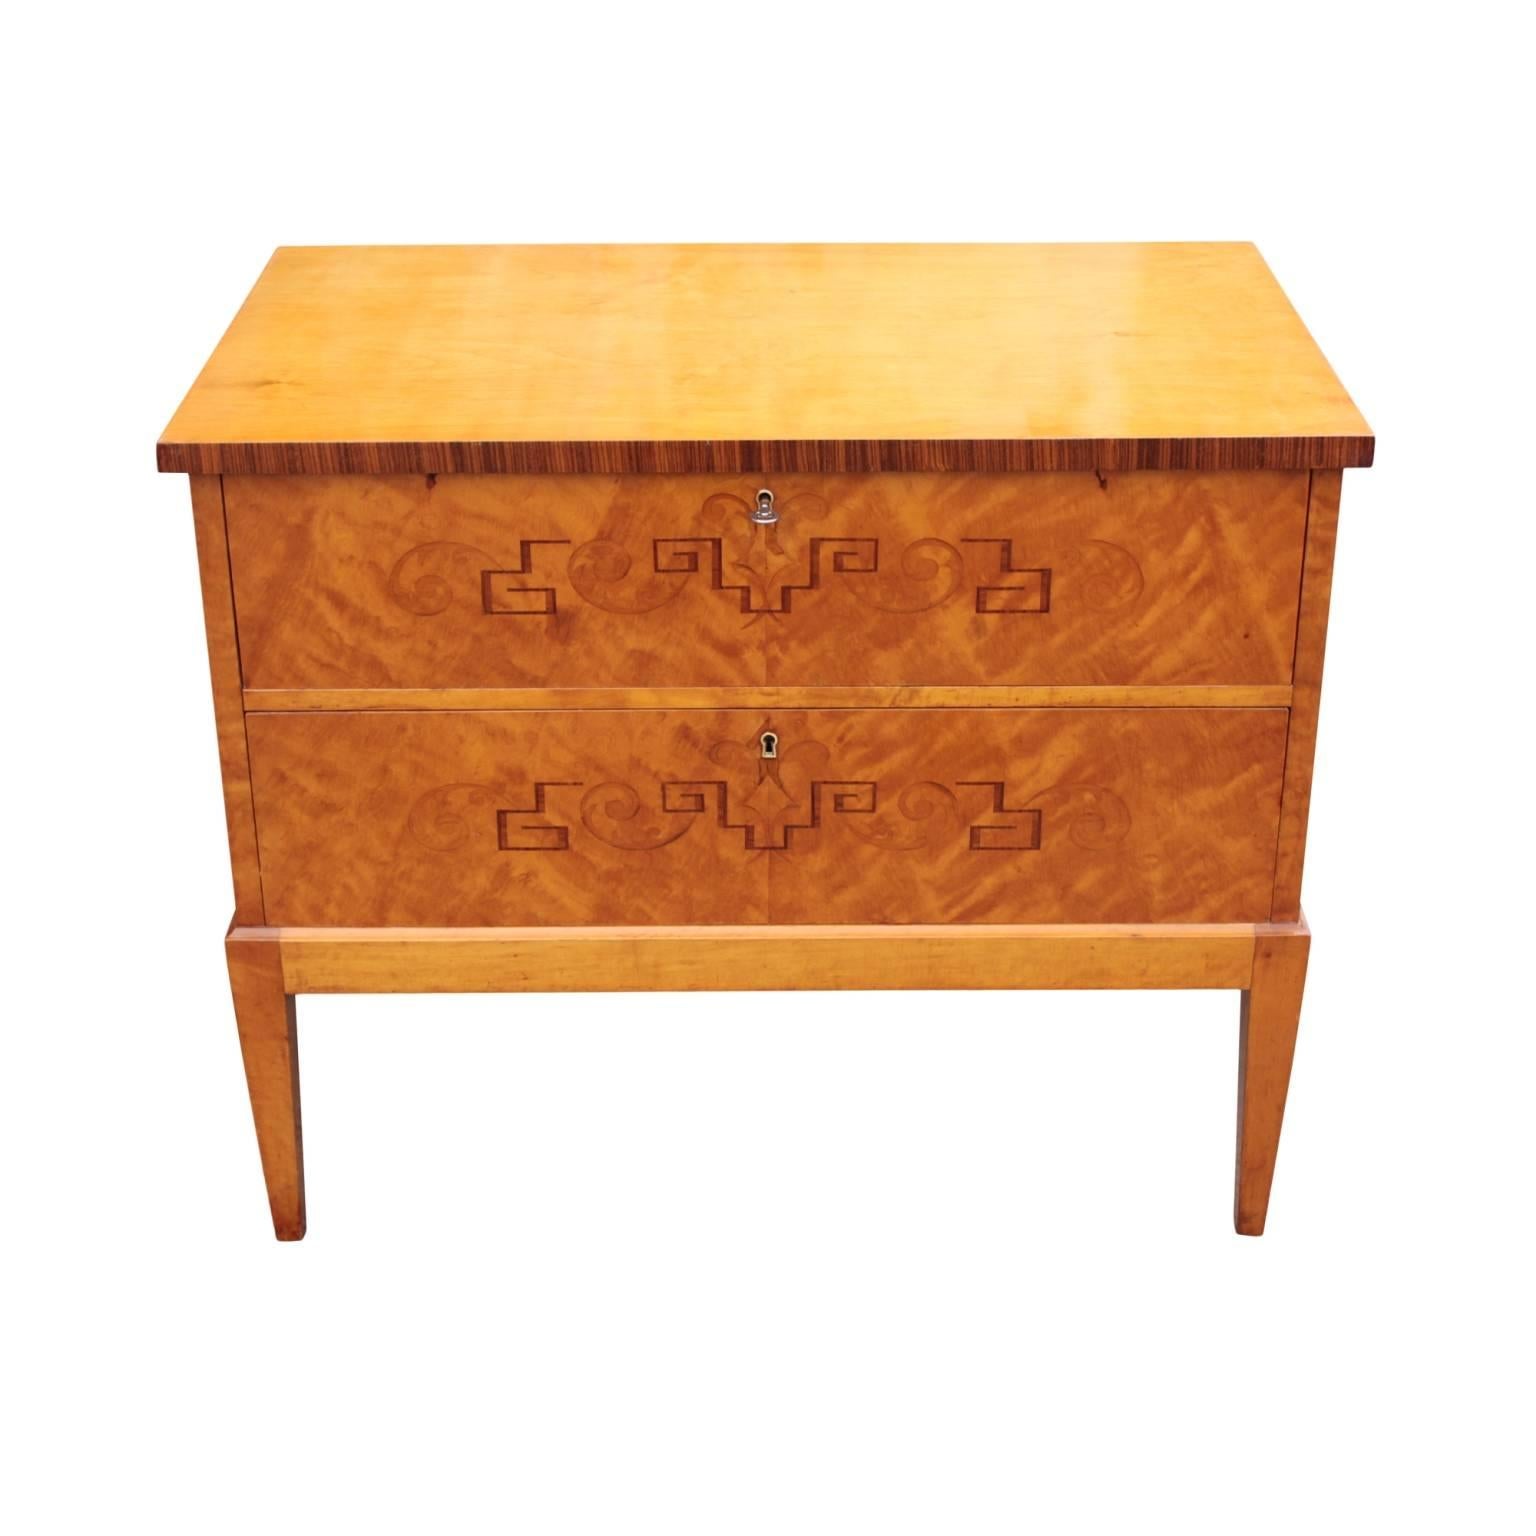 Art Deco Swedish Neoclassical Grace Period Small Inlaid Chest of Drawers